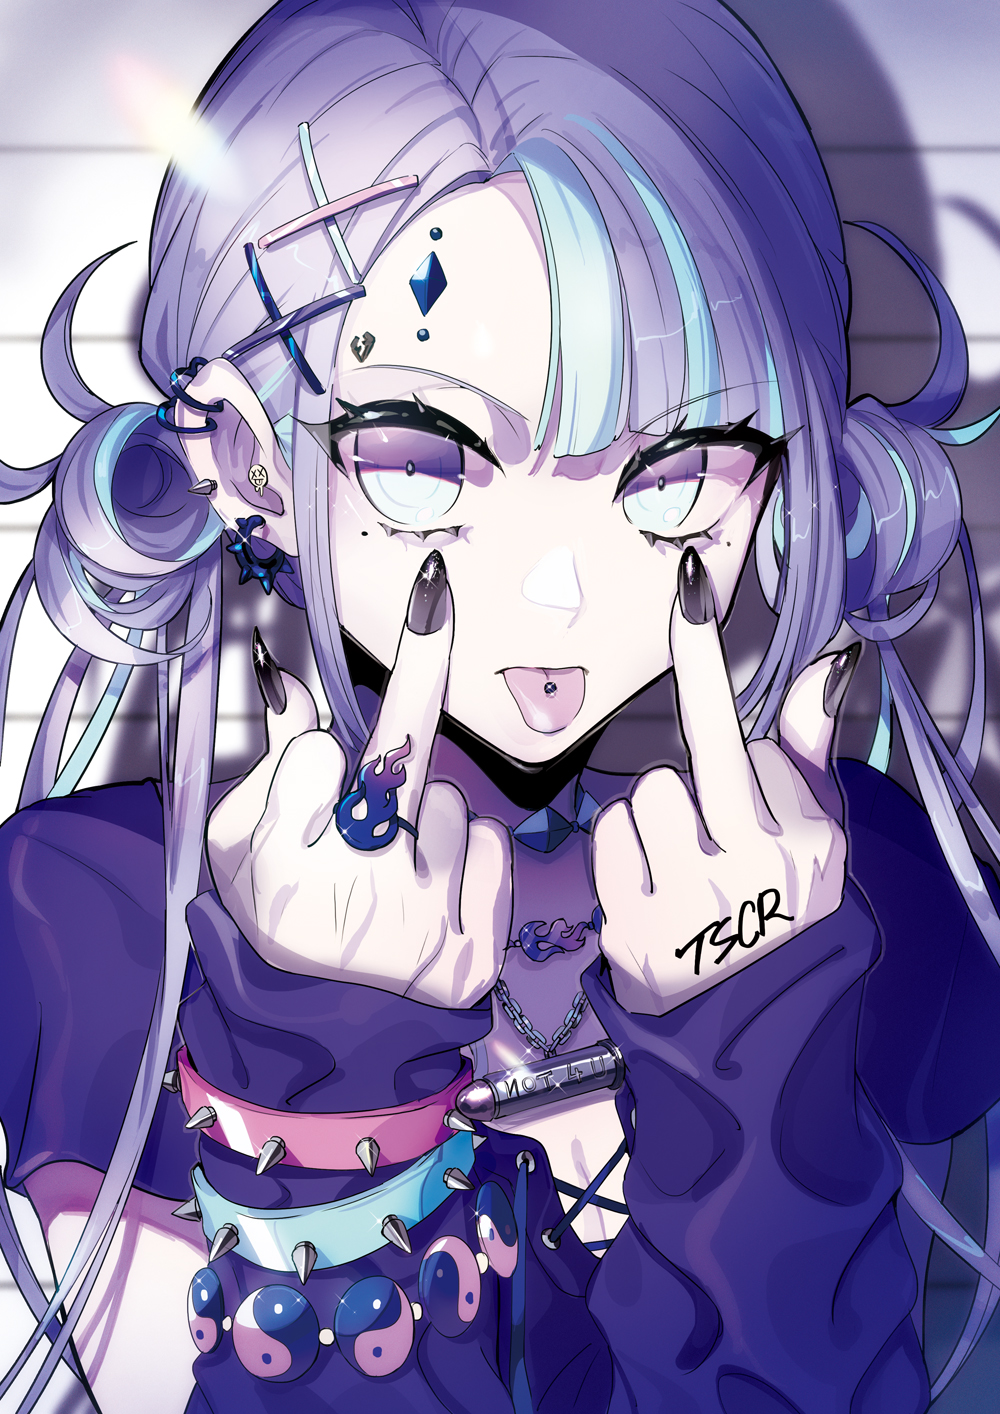 Anime 1000x1414 anime anime girls simple background original characters fashion piercing middle finger TSCR portrait display pierced tongue